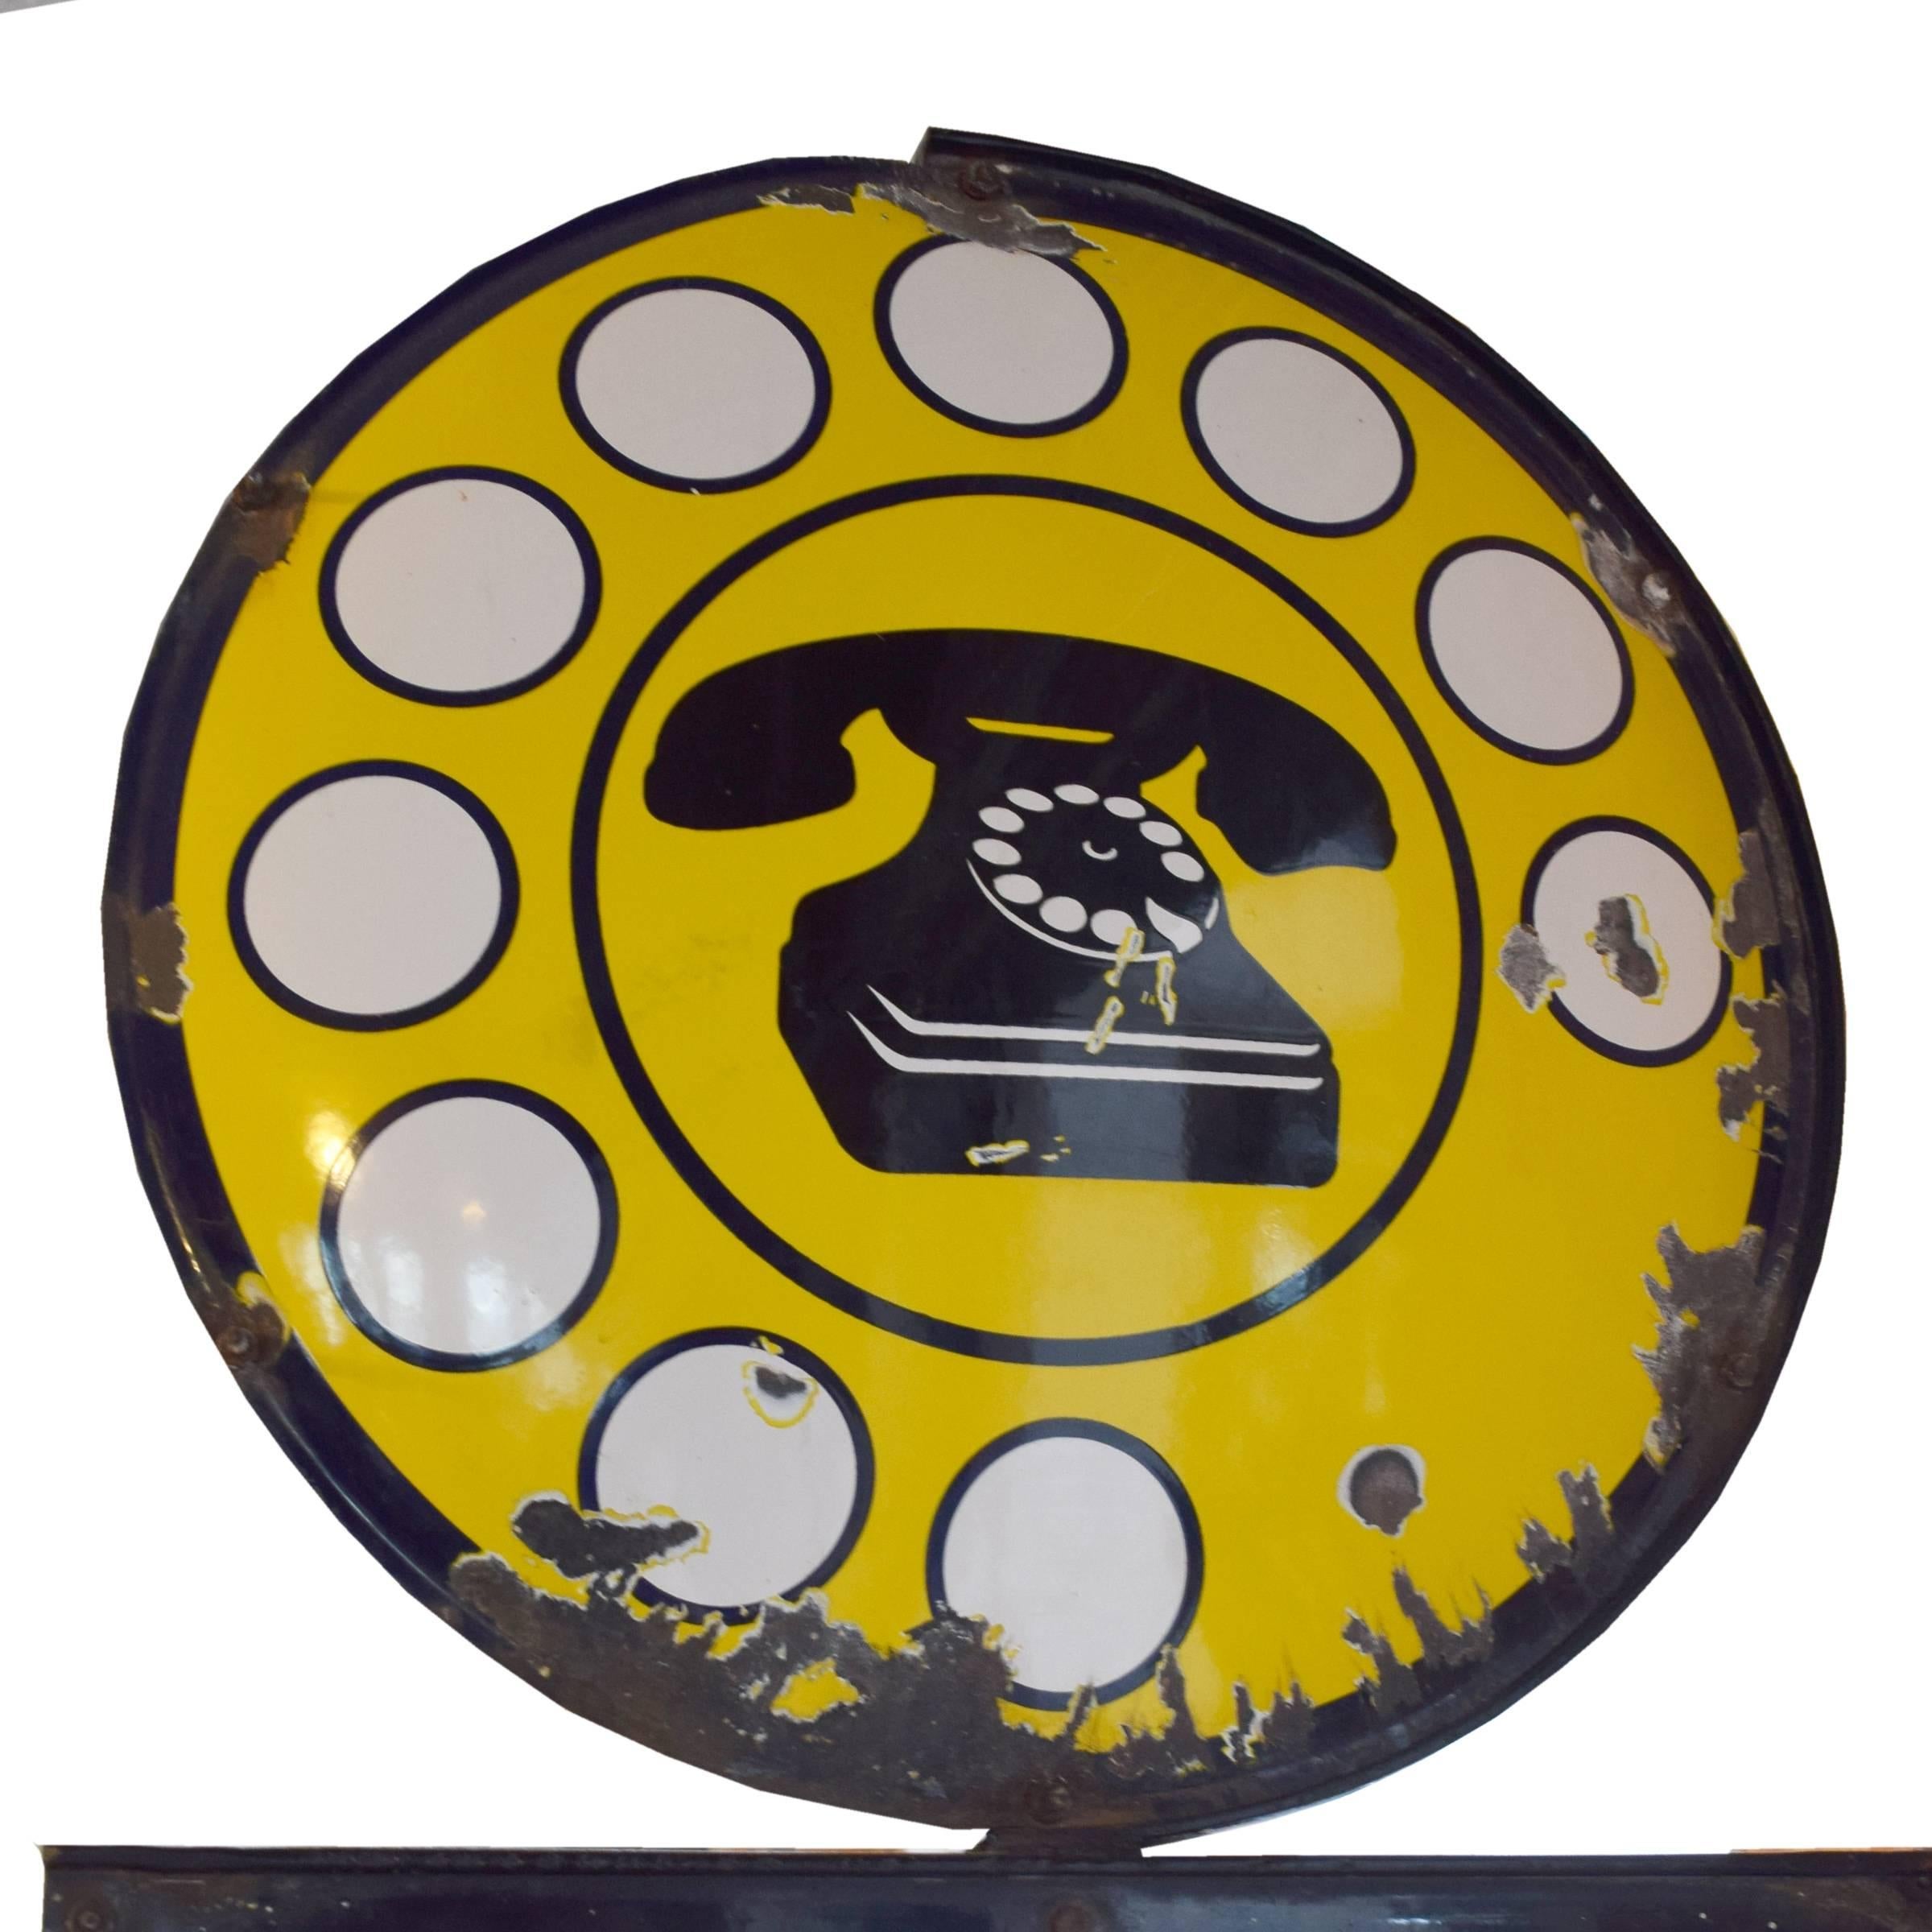 An Italian yellow and black enamel metal public telephone sign advertising 'interurbano automatico', or capabilities of making long distance calls without an operator, circa 1950.